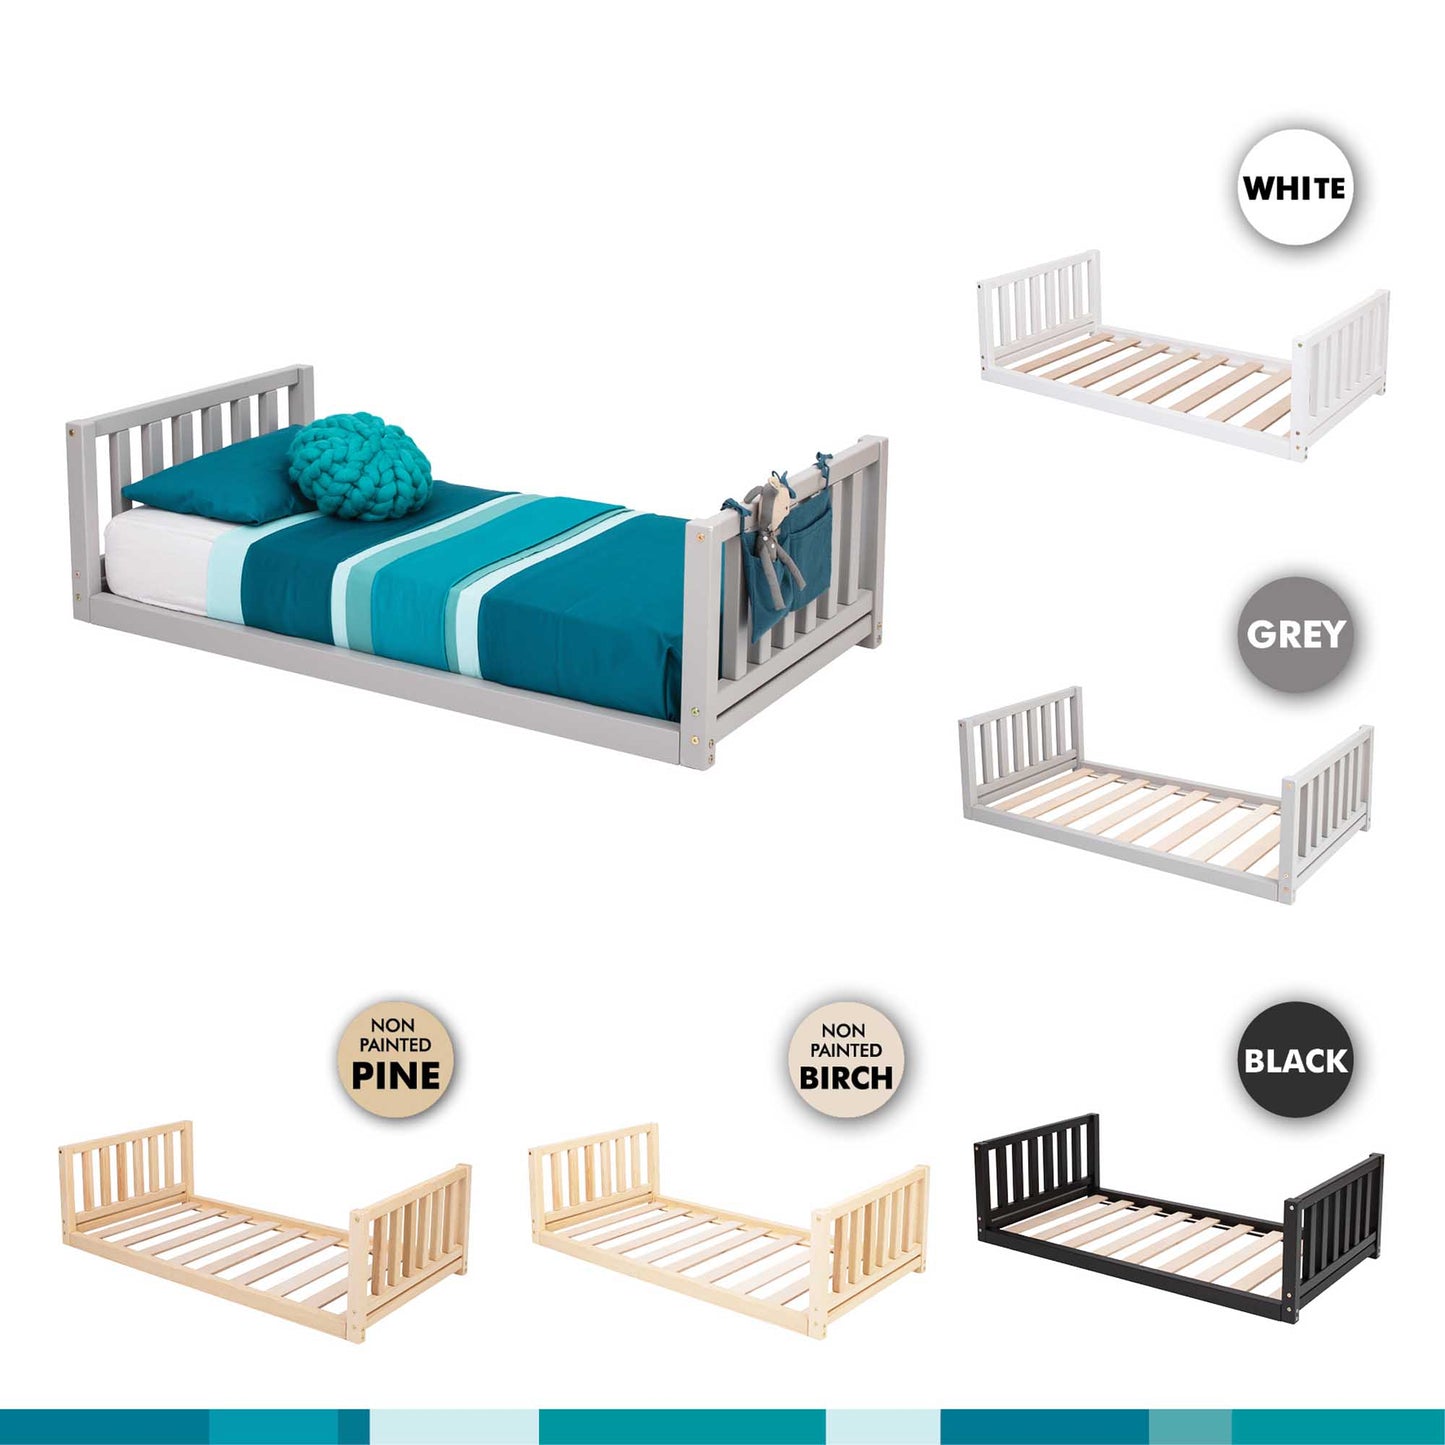 A 2-in-1 kid's bed on legs with a vertical rail headboard and footboard, made of solid pine or birch wood, available in a variety of colors and styles with slats. Perfect as a children's bed.